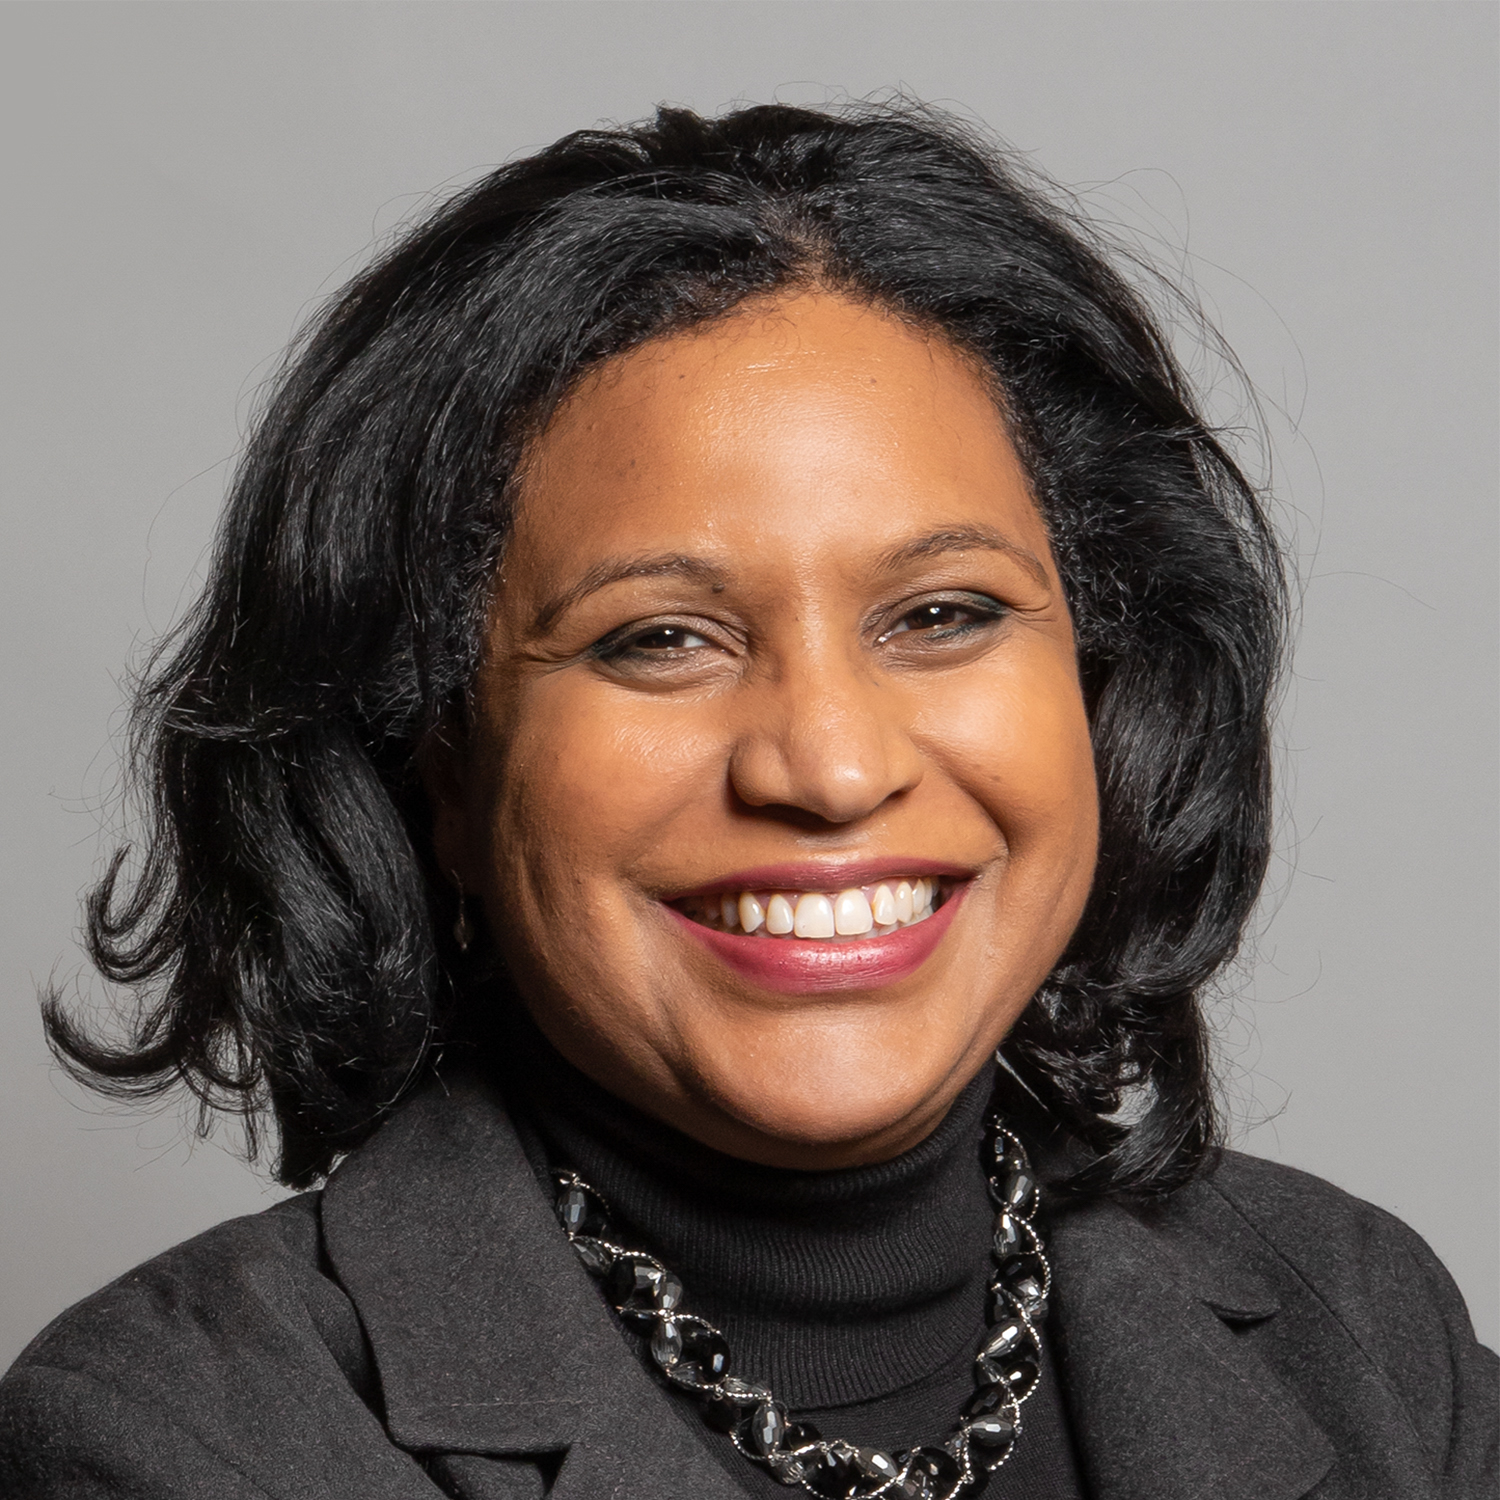 MP Janet Daby